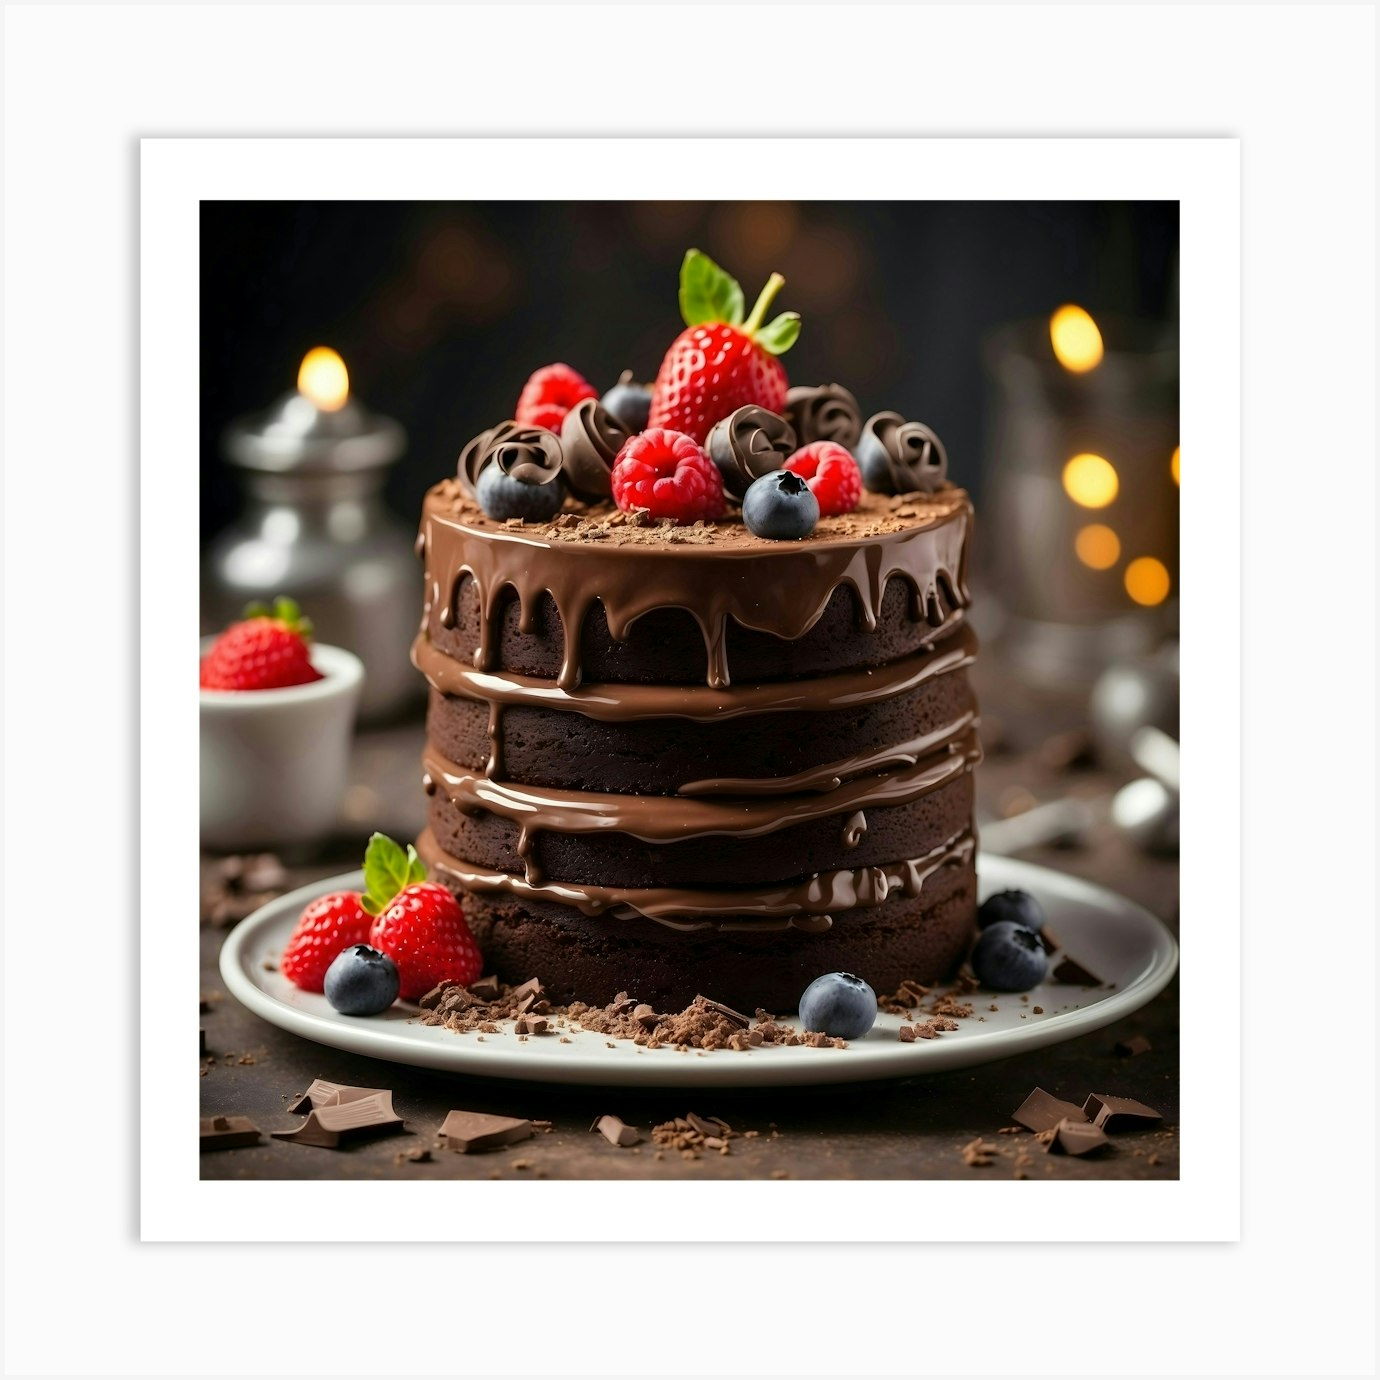 Chocolate Cake With Berries 3 Art Print By Ishwar Creation Fy 